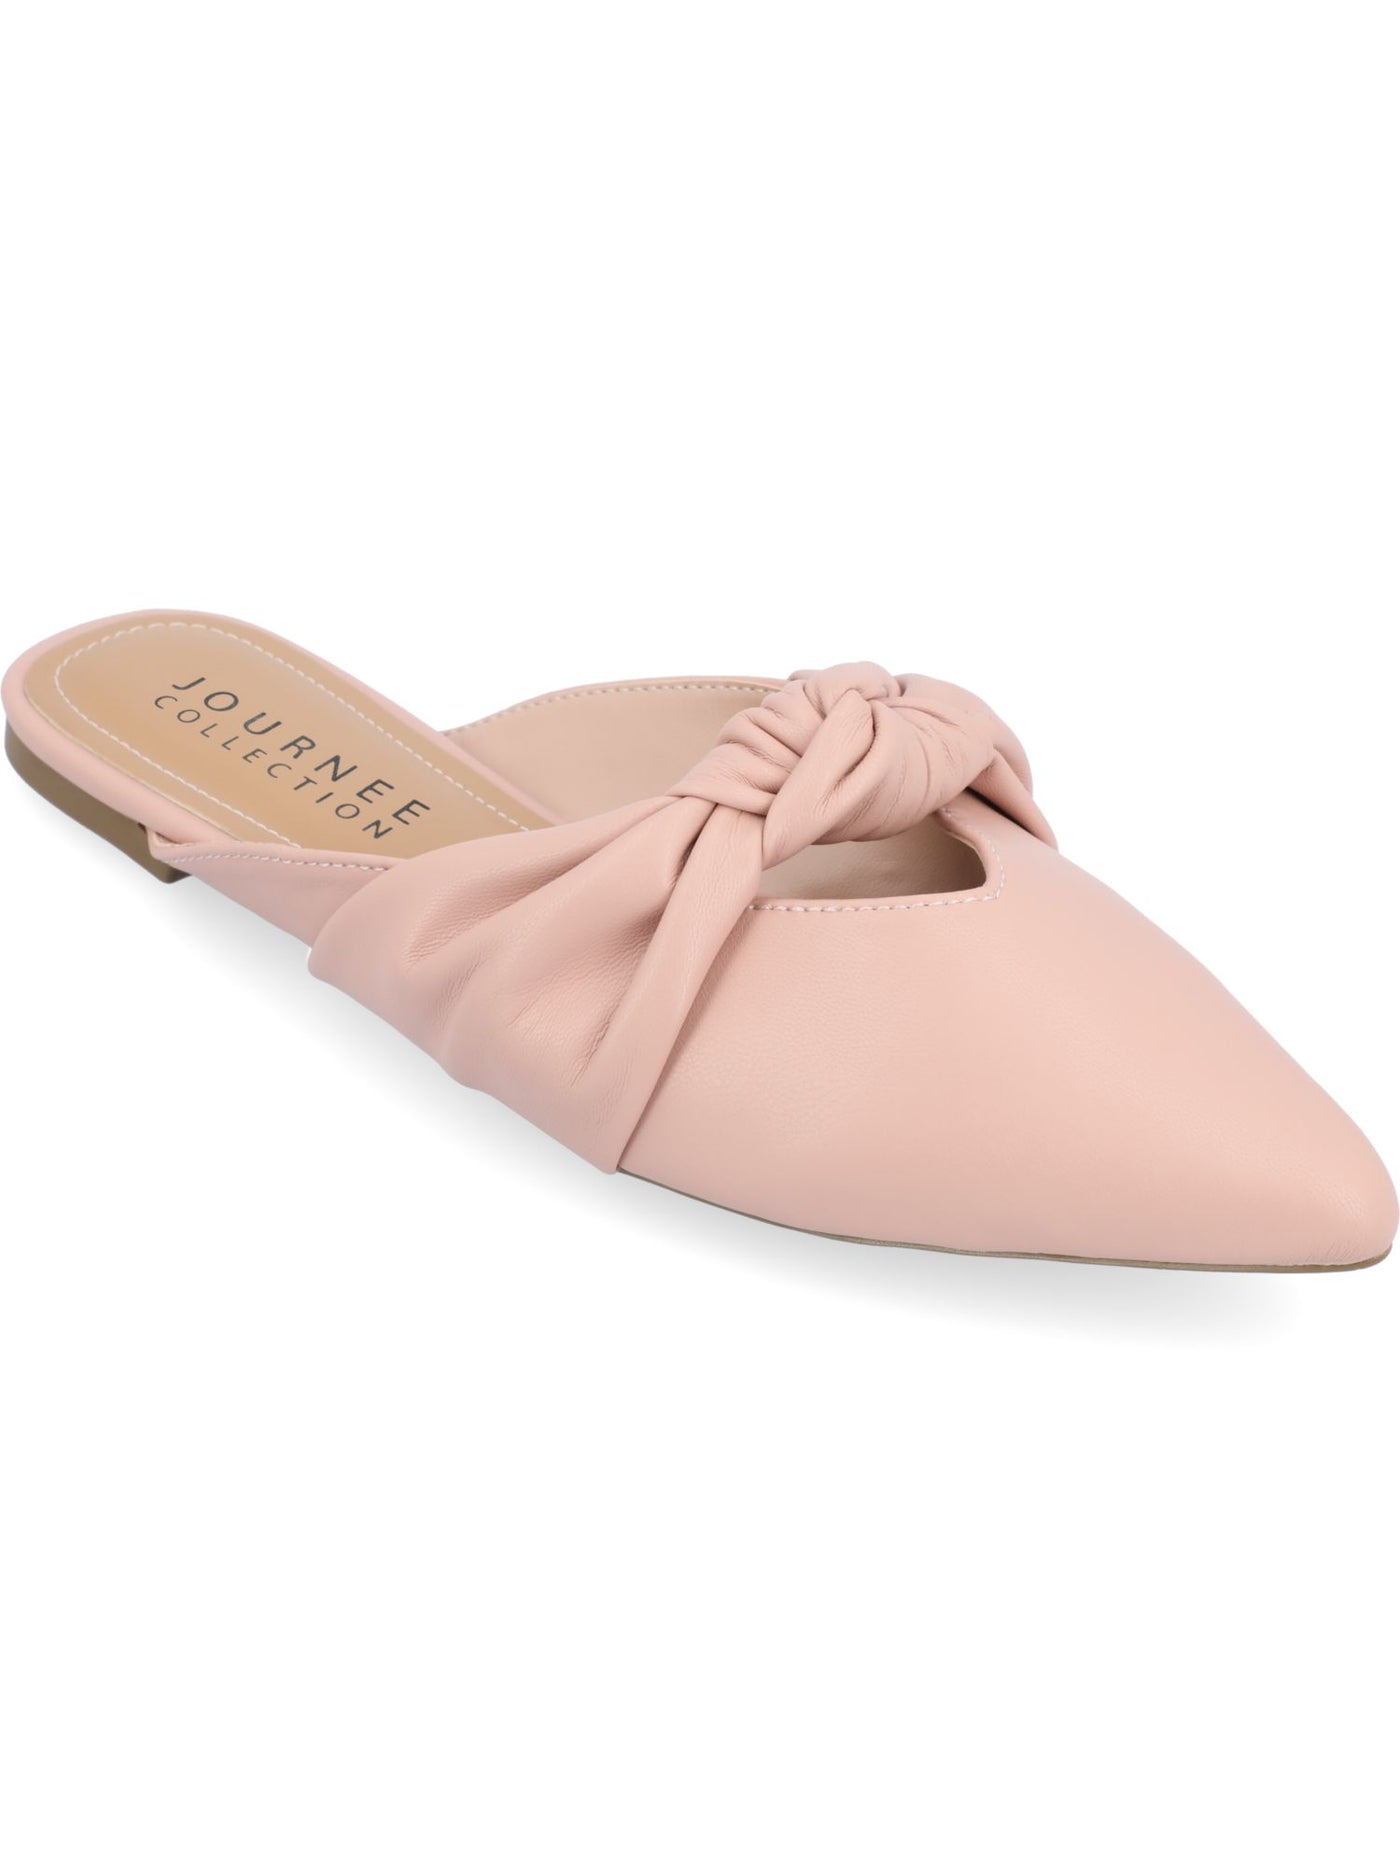 JOURNEE COLLECTION Womens Pink Knotted Padded Salinn Pointed Toe Slip On Mules 8